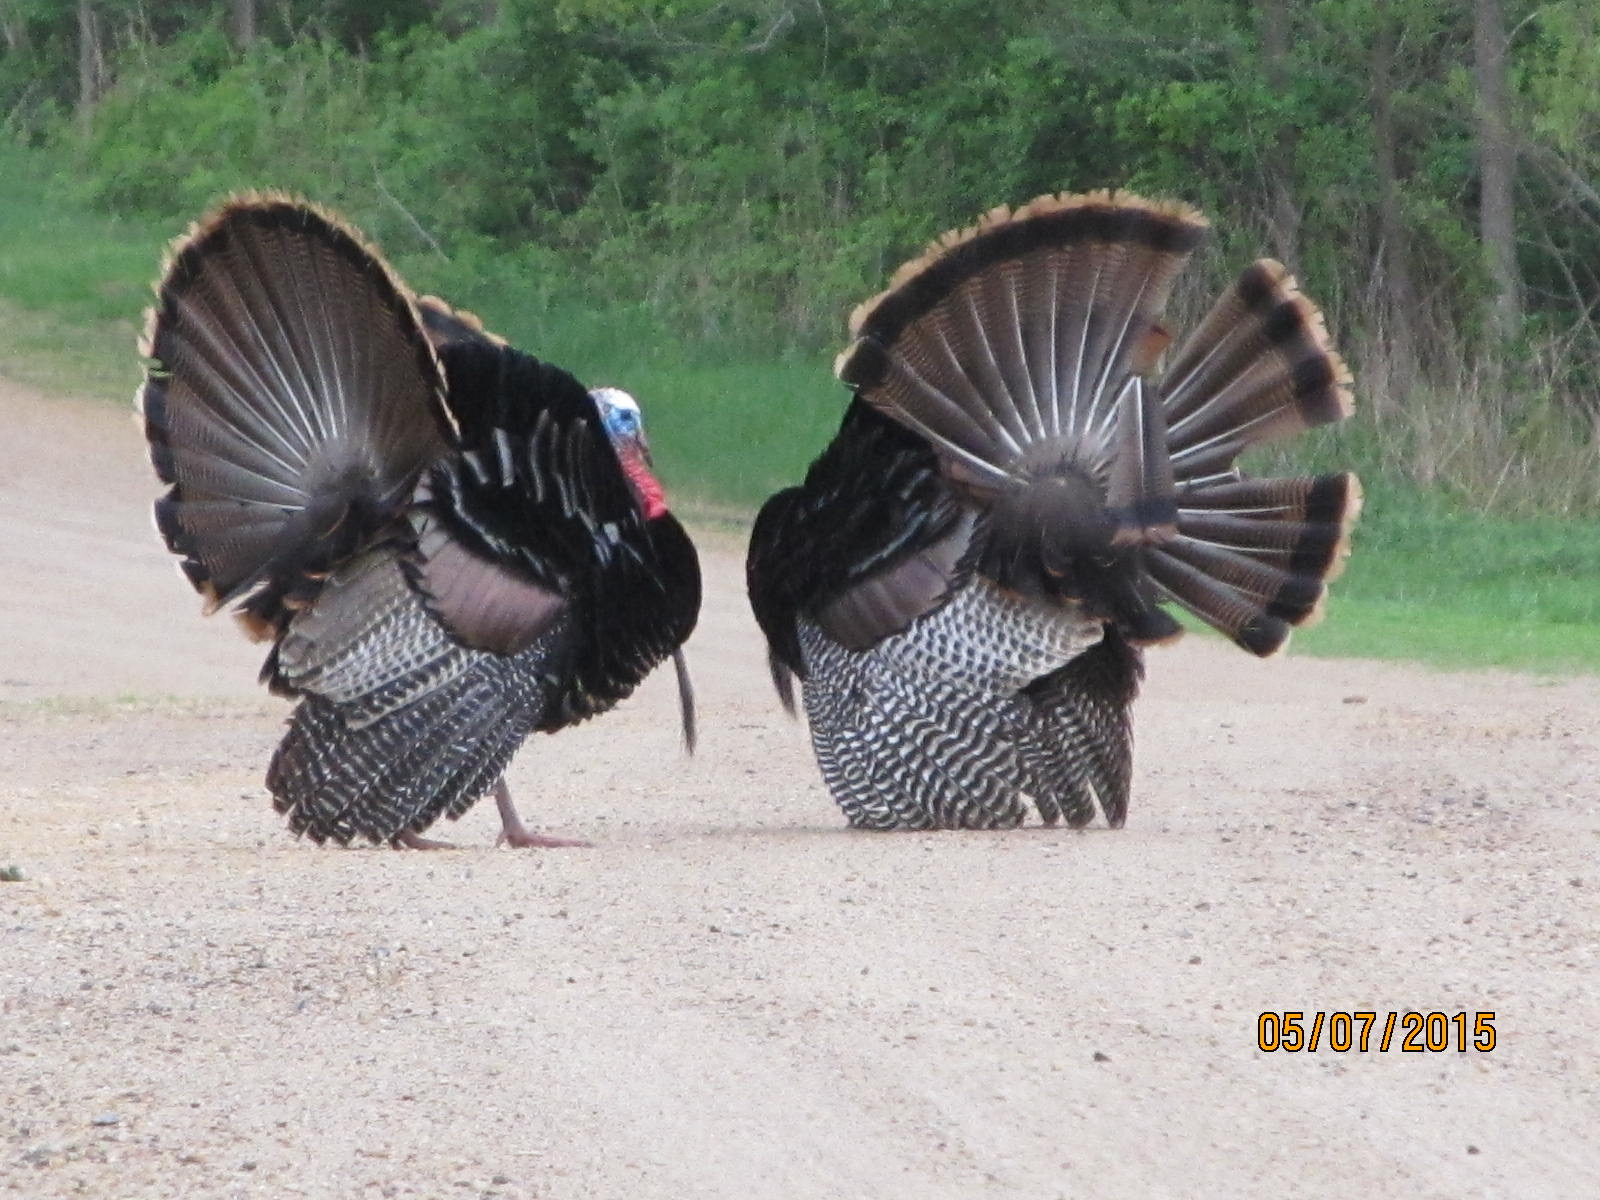 Wild turkeys displaying their feathers at the Pine Bend Bluffs natural area.